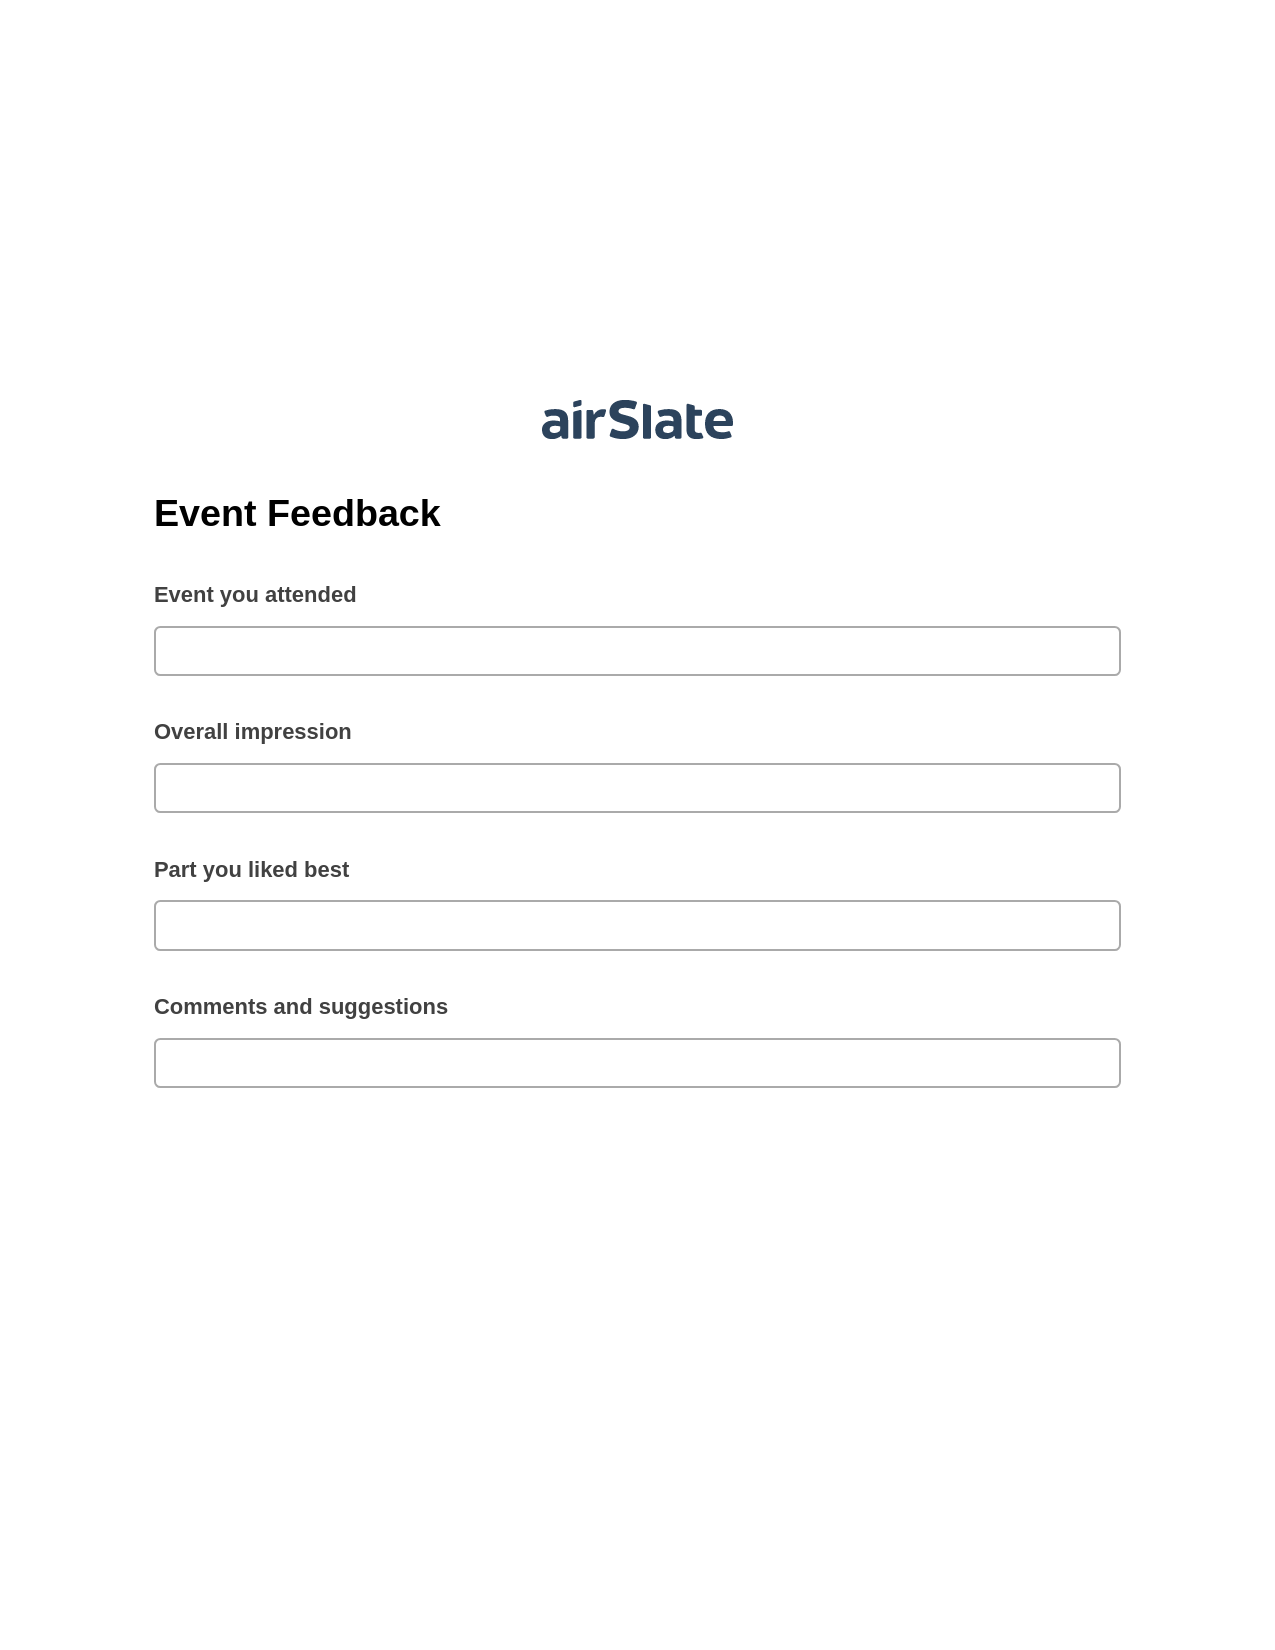 Event Feedback Pre-fill from CSV File Bot, Create NetSuite Records Bot, Export to Google Sheet Bot